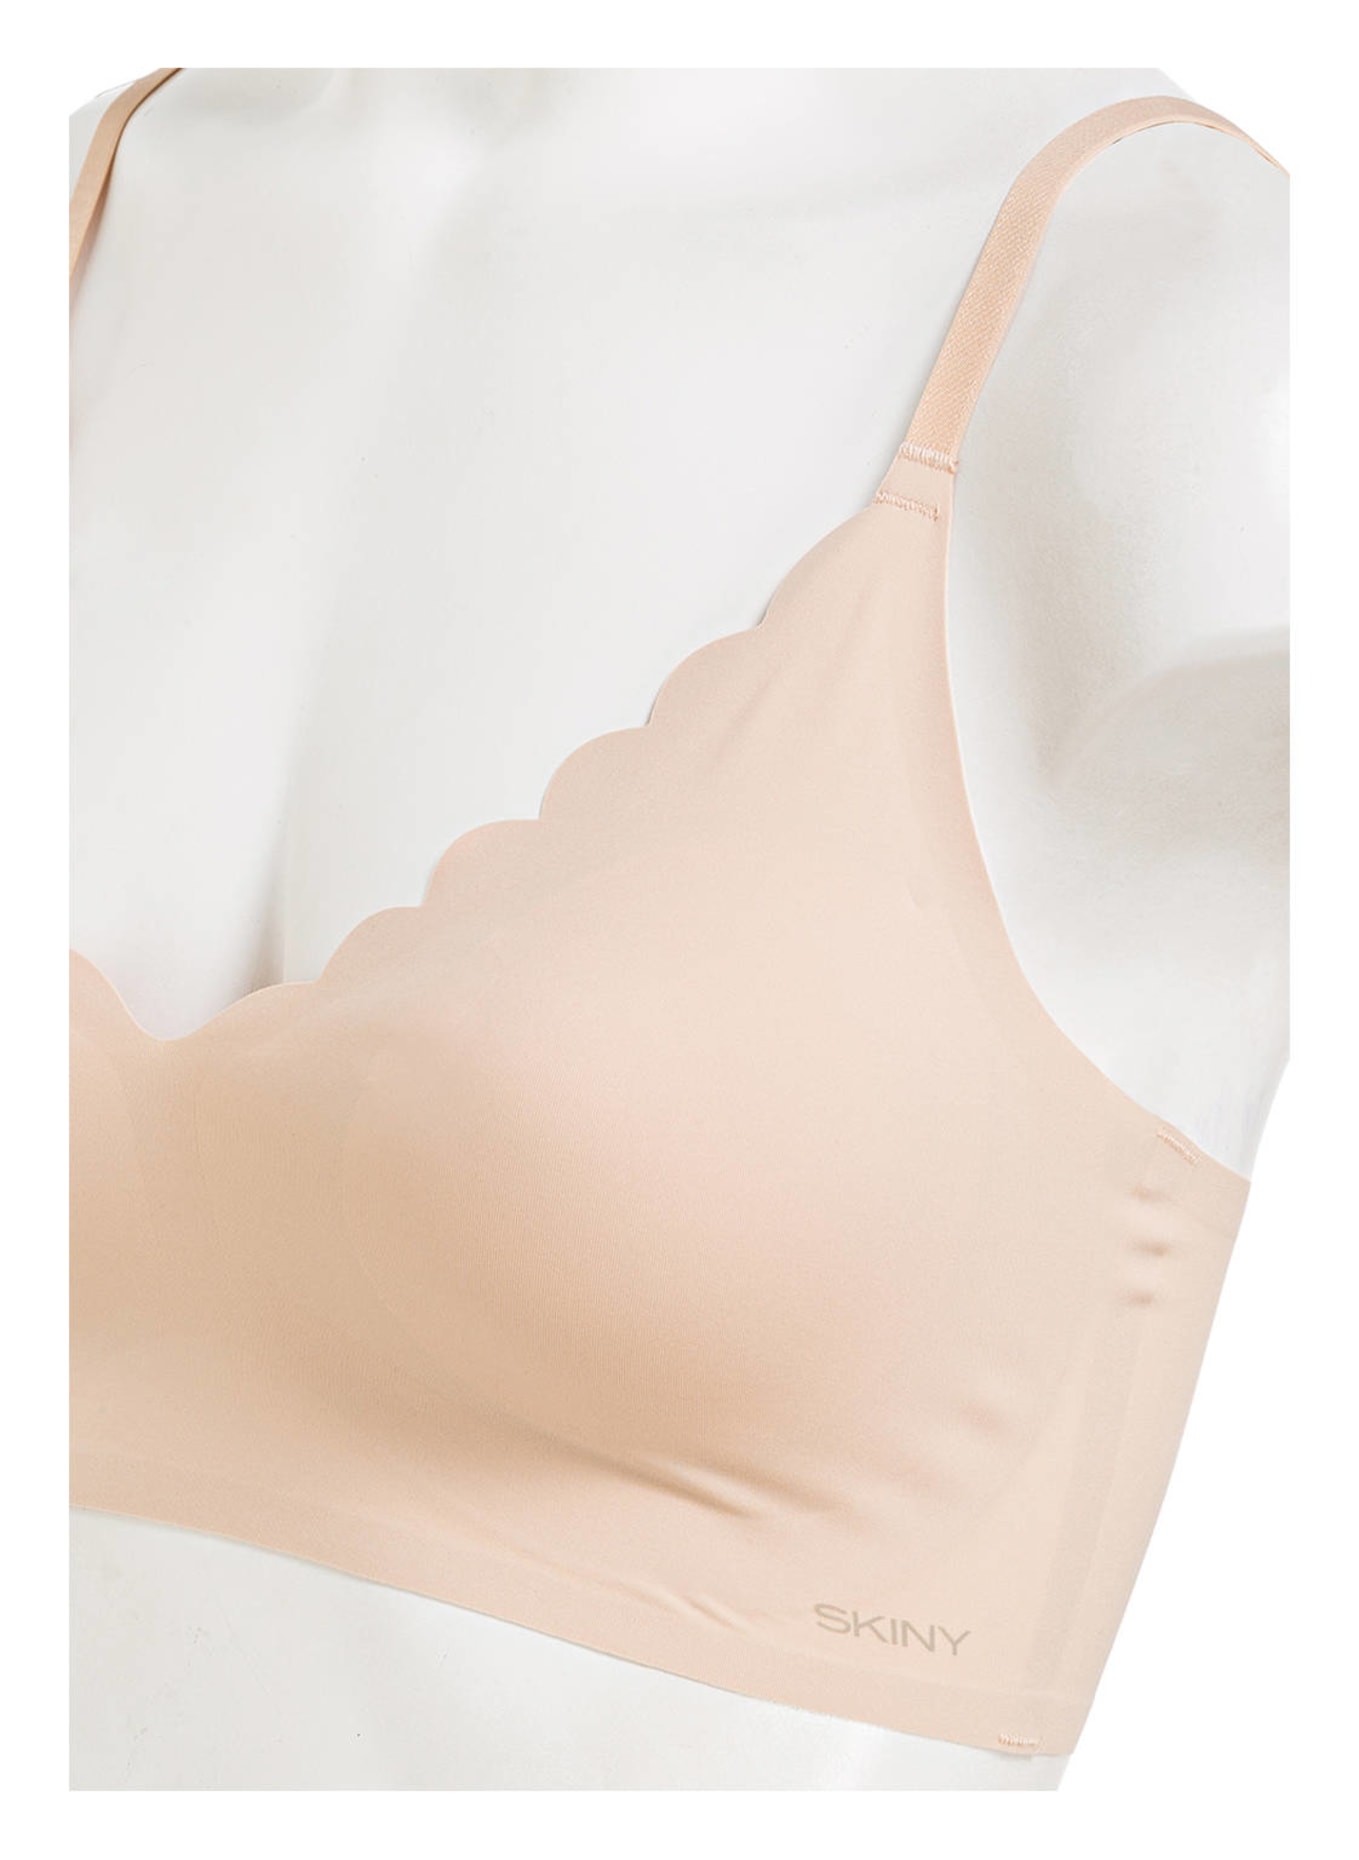 Skiny Bustier EVERY DAY IN MICRO ESSENTIALS, Farbe: NUDE (Bild 3)